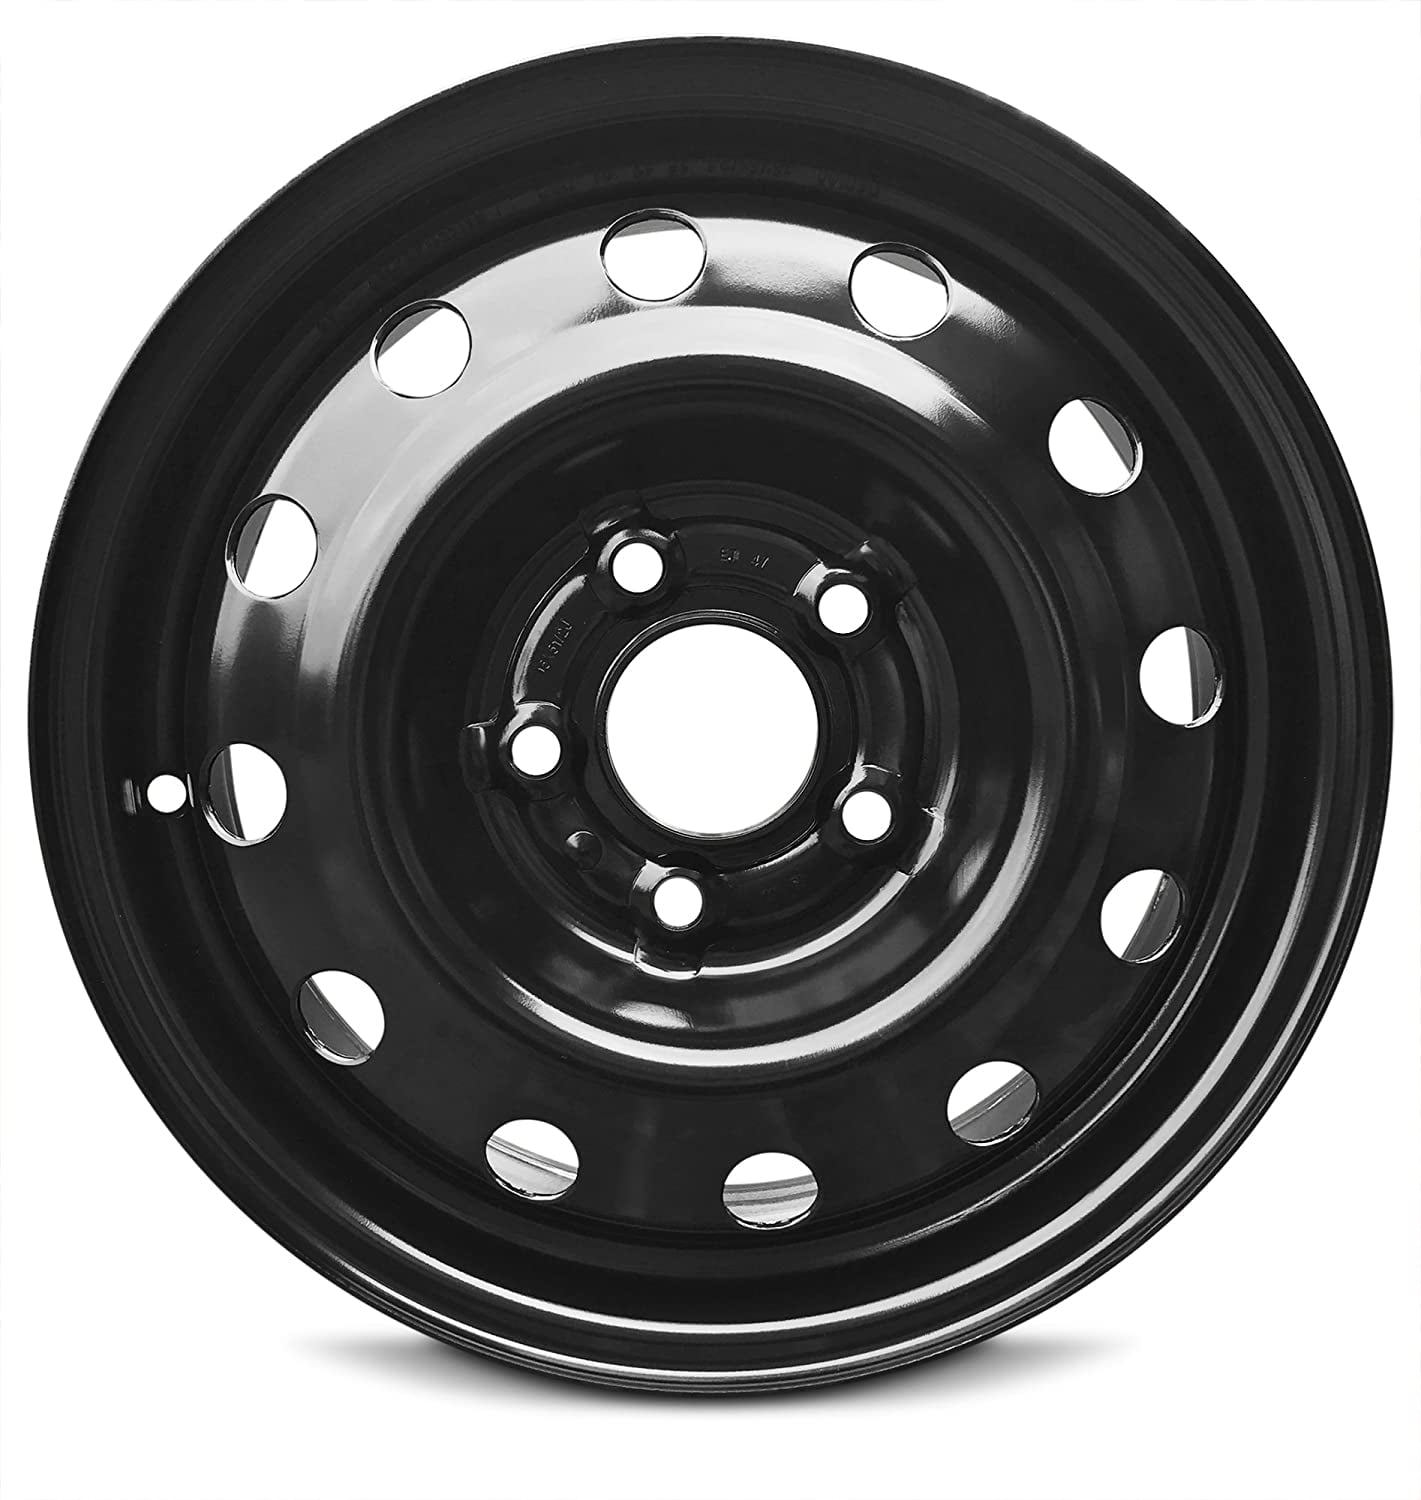 Wheel For 11 17 Jeep Patriot 13 17 Jeep Compass 16 Inch 5 Lug Black Steel Rim Fits R16 Tire Exact Oem Replacement Full Size Spare Walmart Com Walmart Com